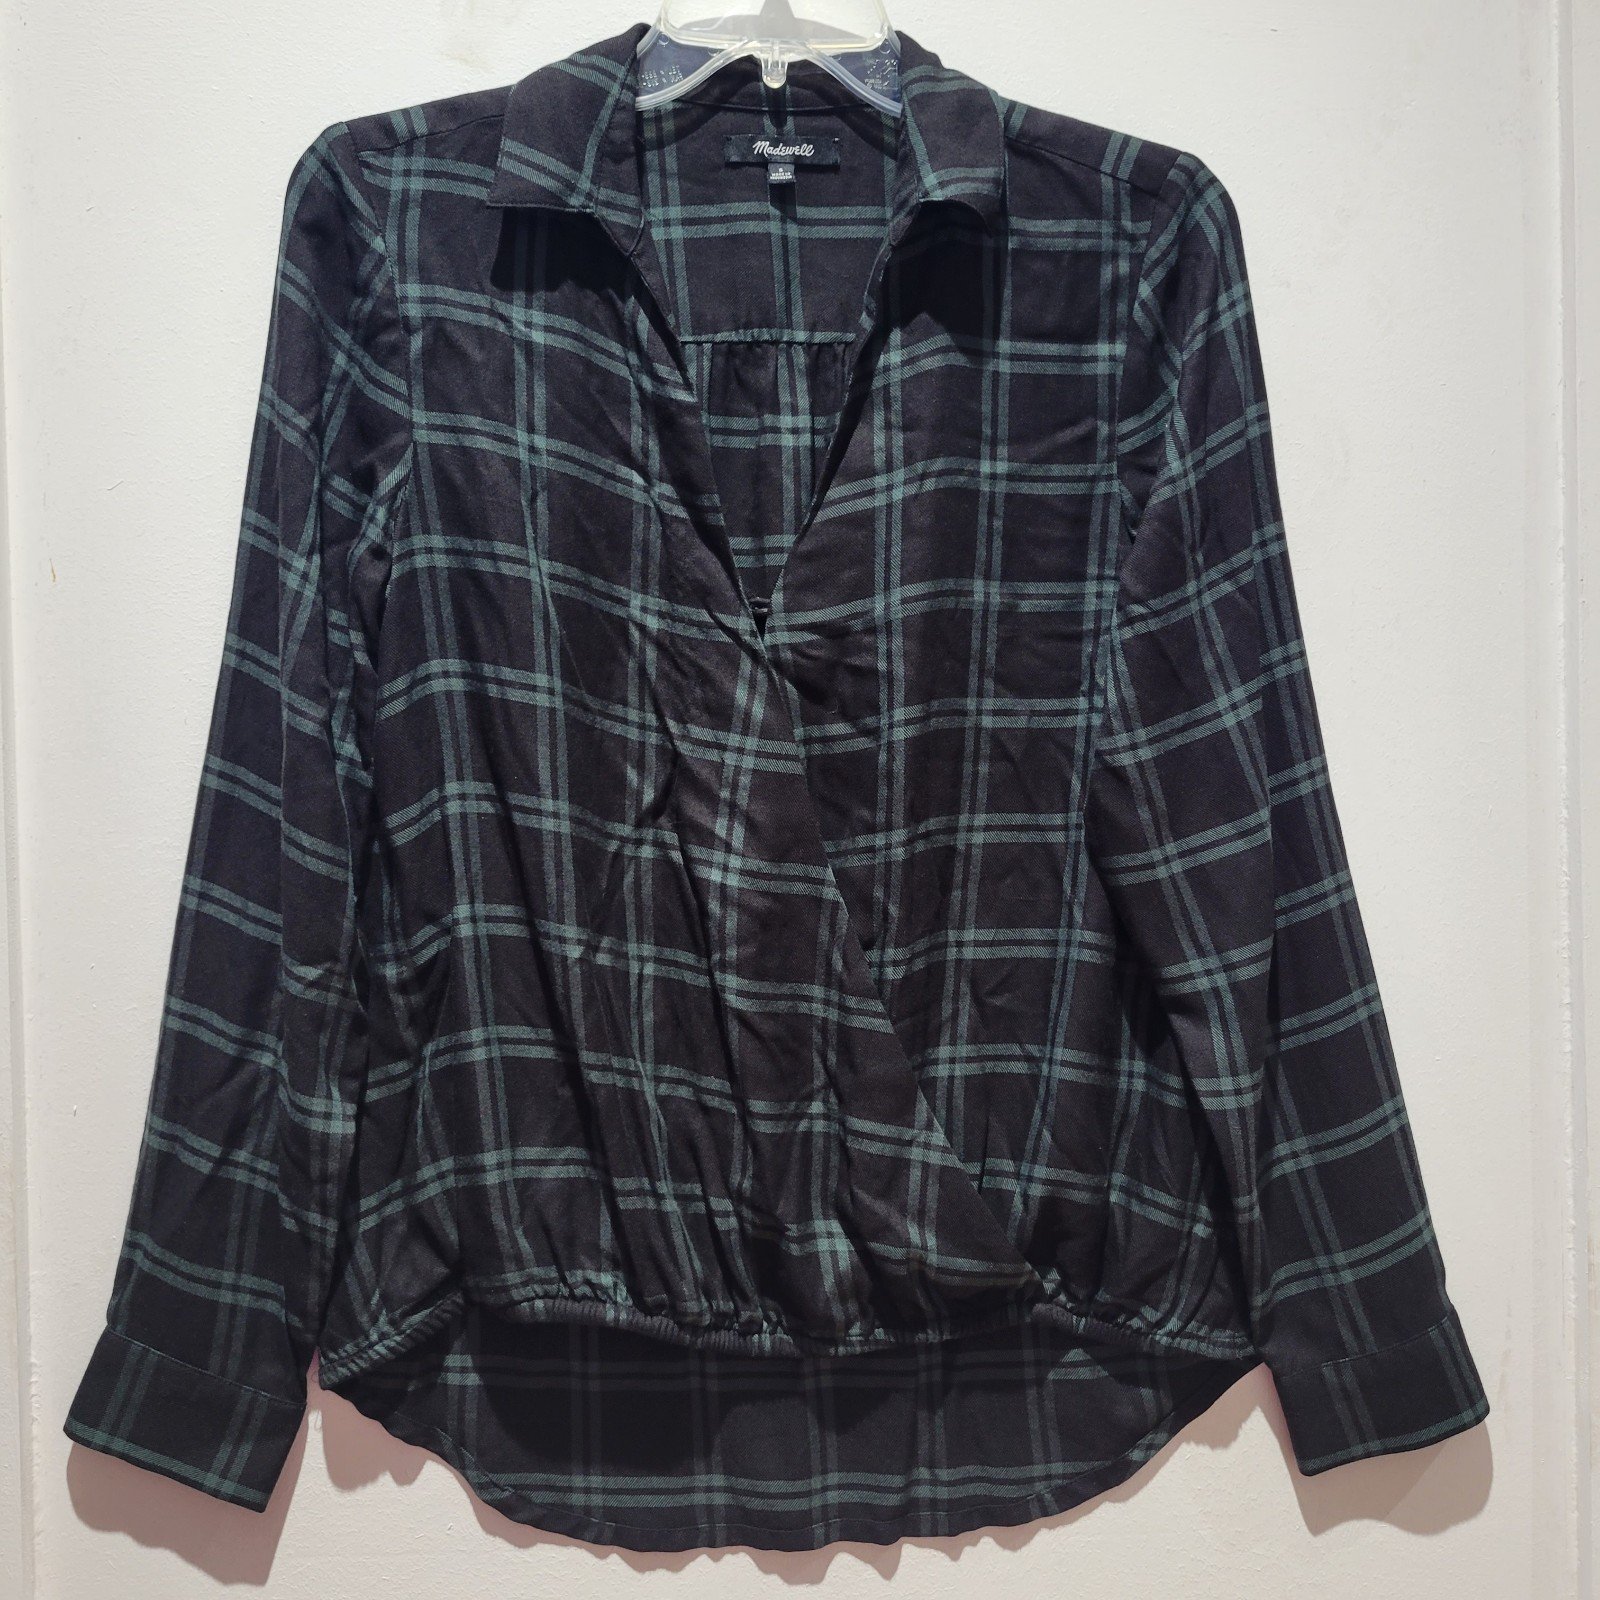 Nice Madewell size small blouse pDHeCS0nX Online Exclus